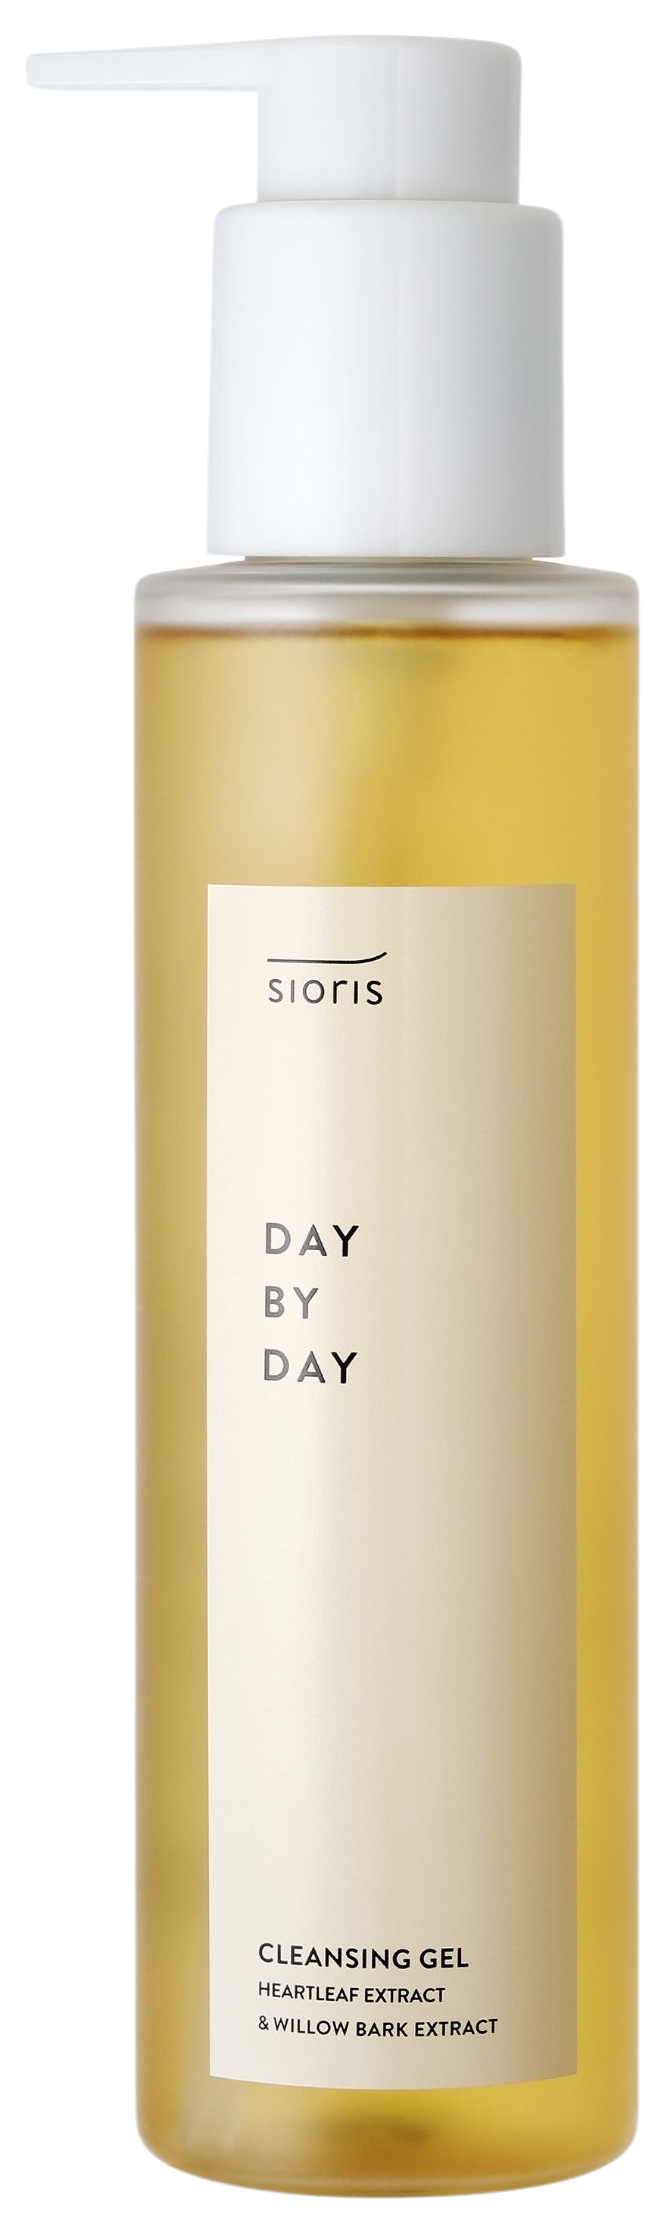 Sioris Day By Day Cleansing Gel, 150 ml